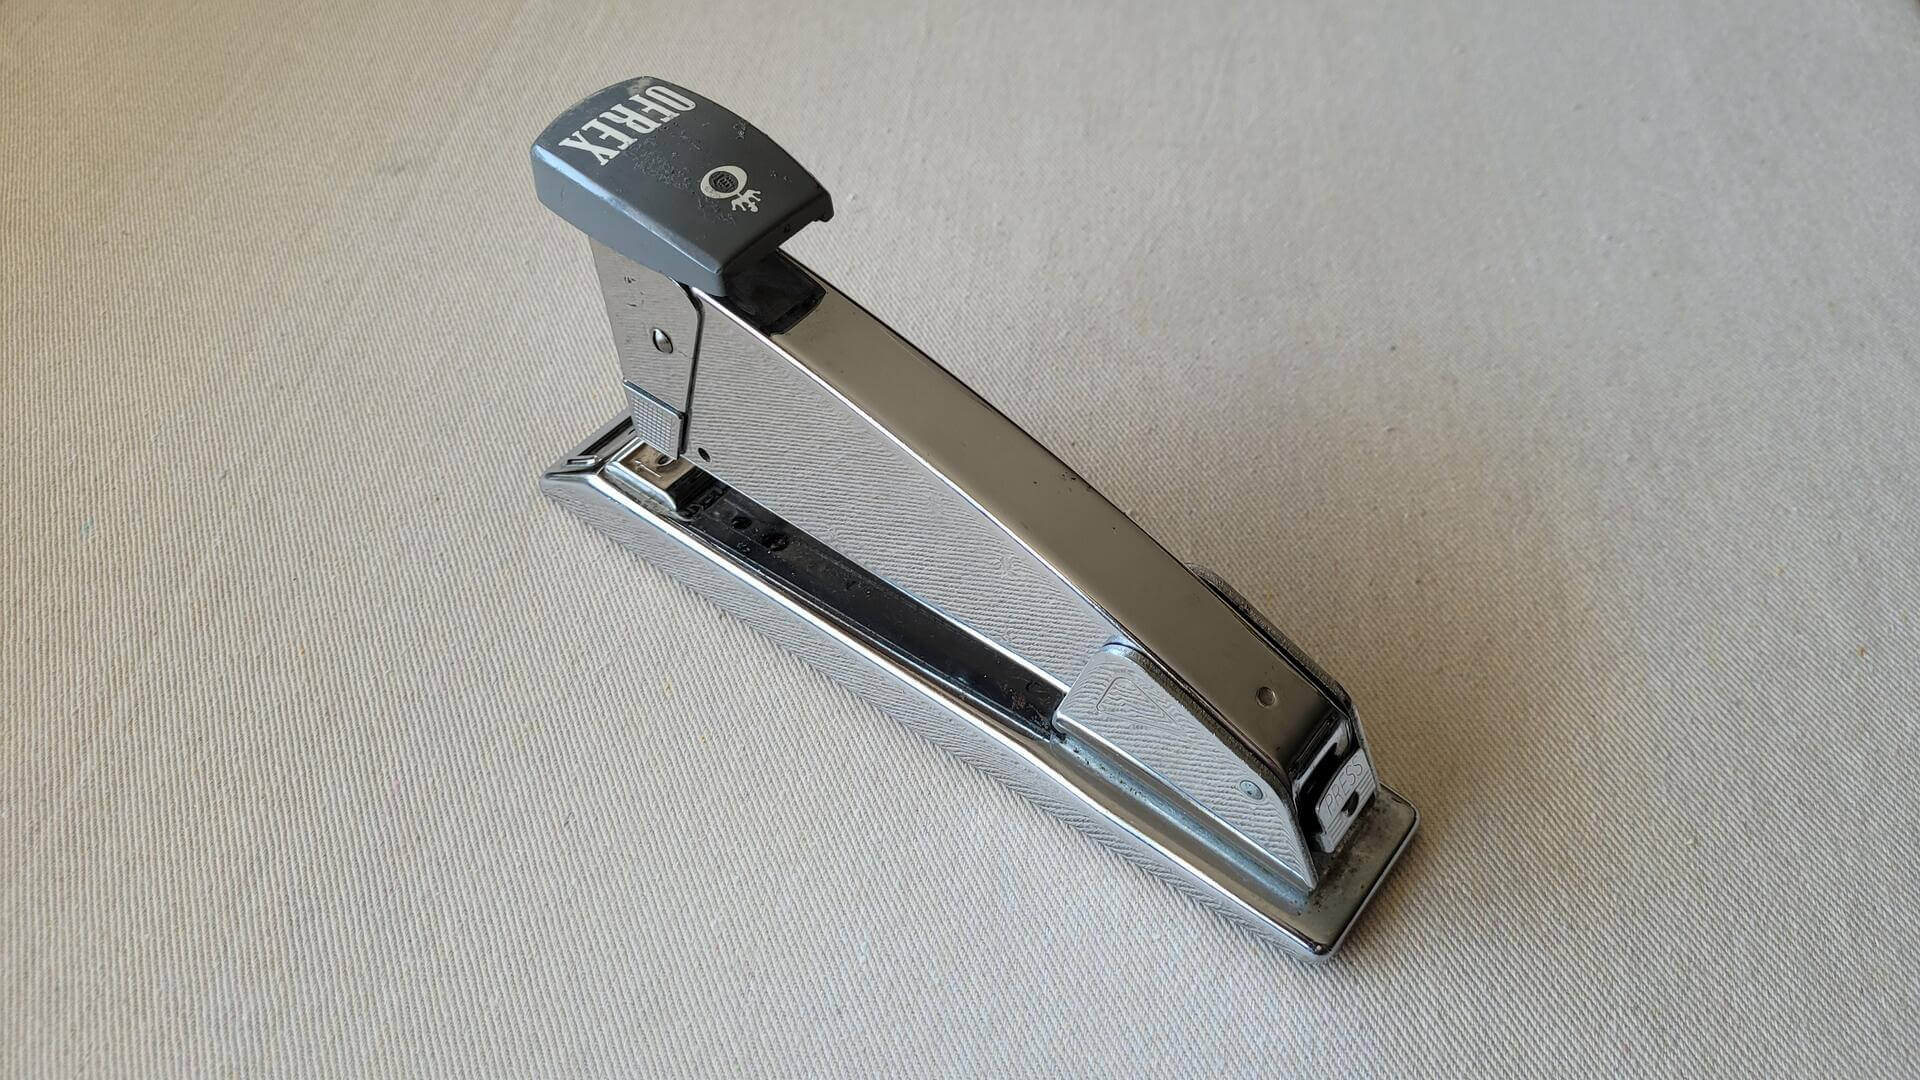 Large vintage stapler by Ofrex Samson 60 model in stainless steel 8 inches long. Retro mid century made in England collectible office equipment